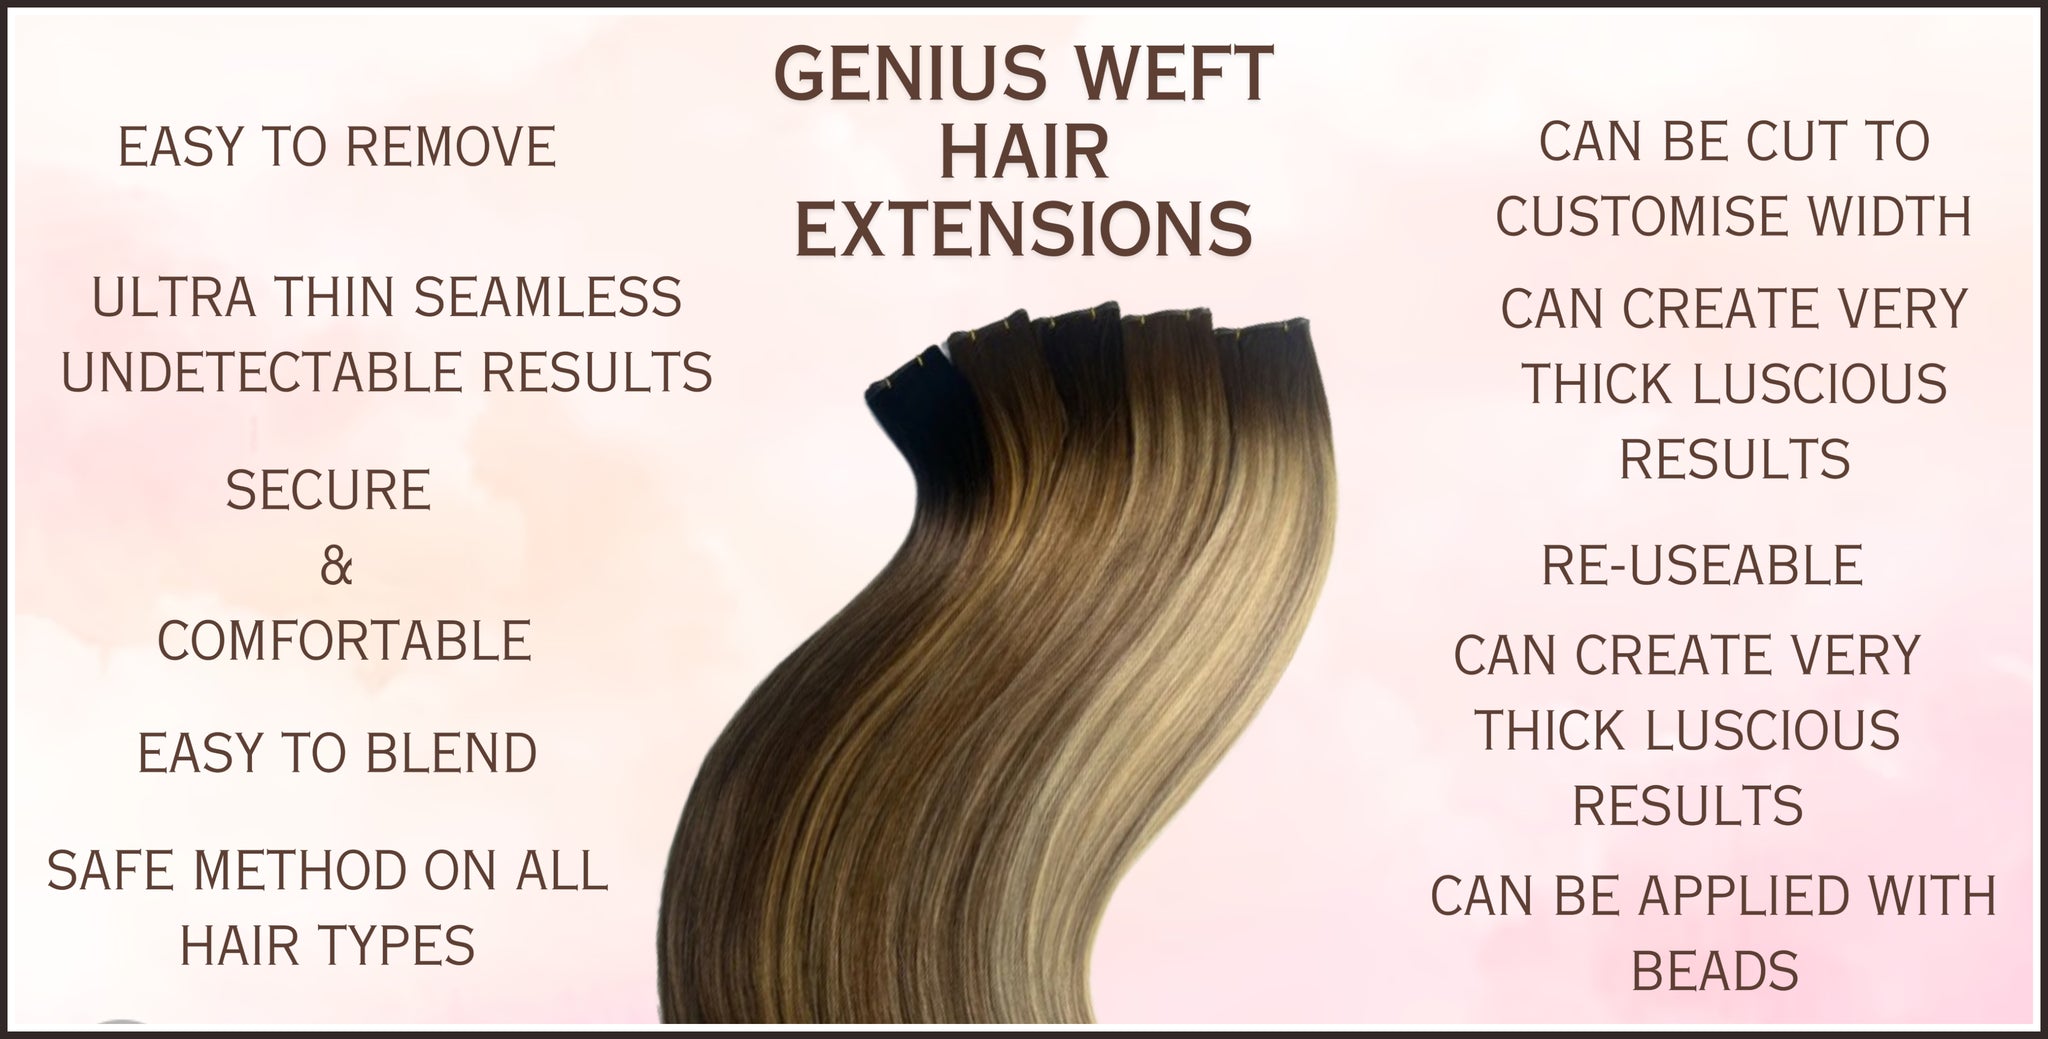 The benefits of using invisible weft